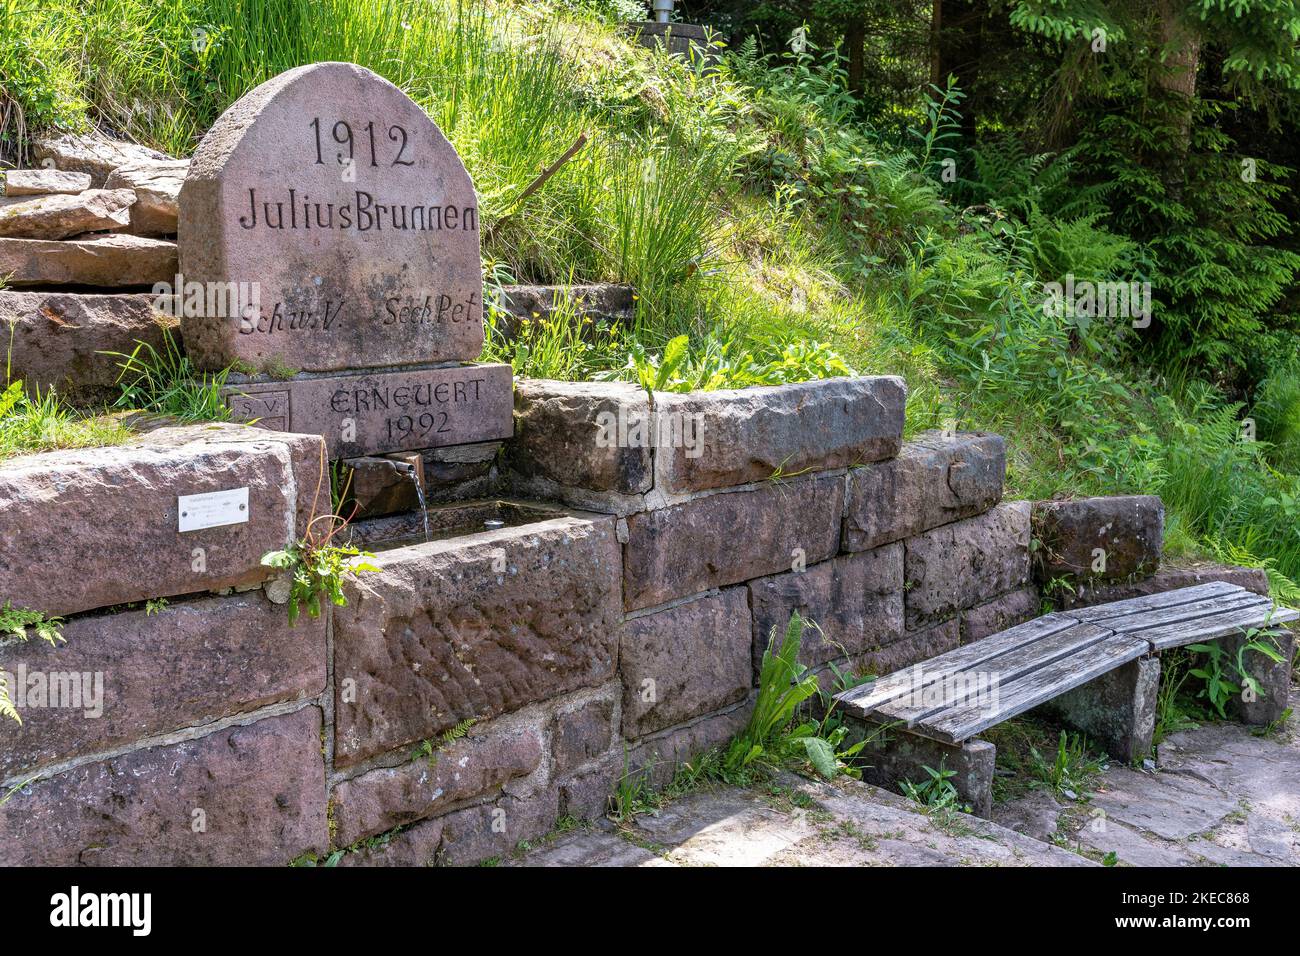 Europe, Germany, Southern Germany, Baden-Württemberg, Black Forest, Juliusbrunnen on the 5th stage of the Westweg trail Stock Photo